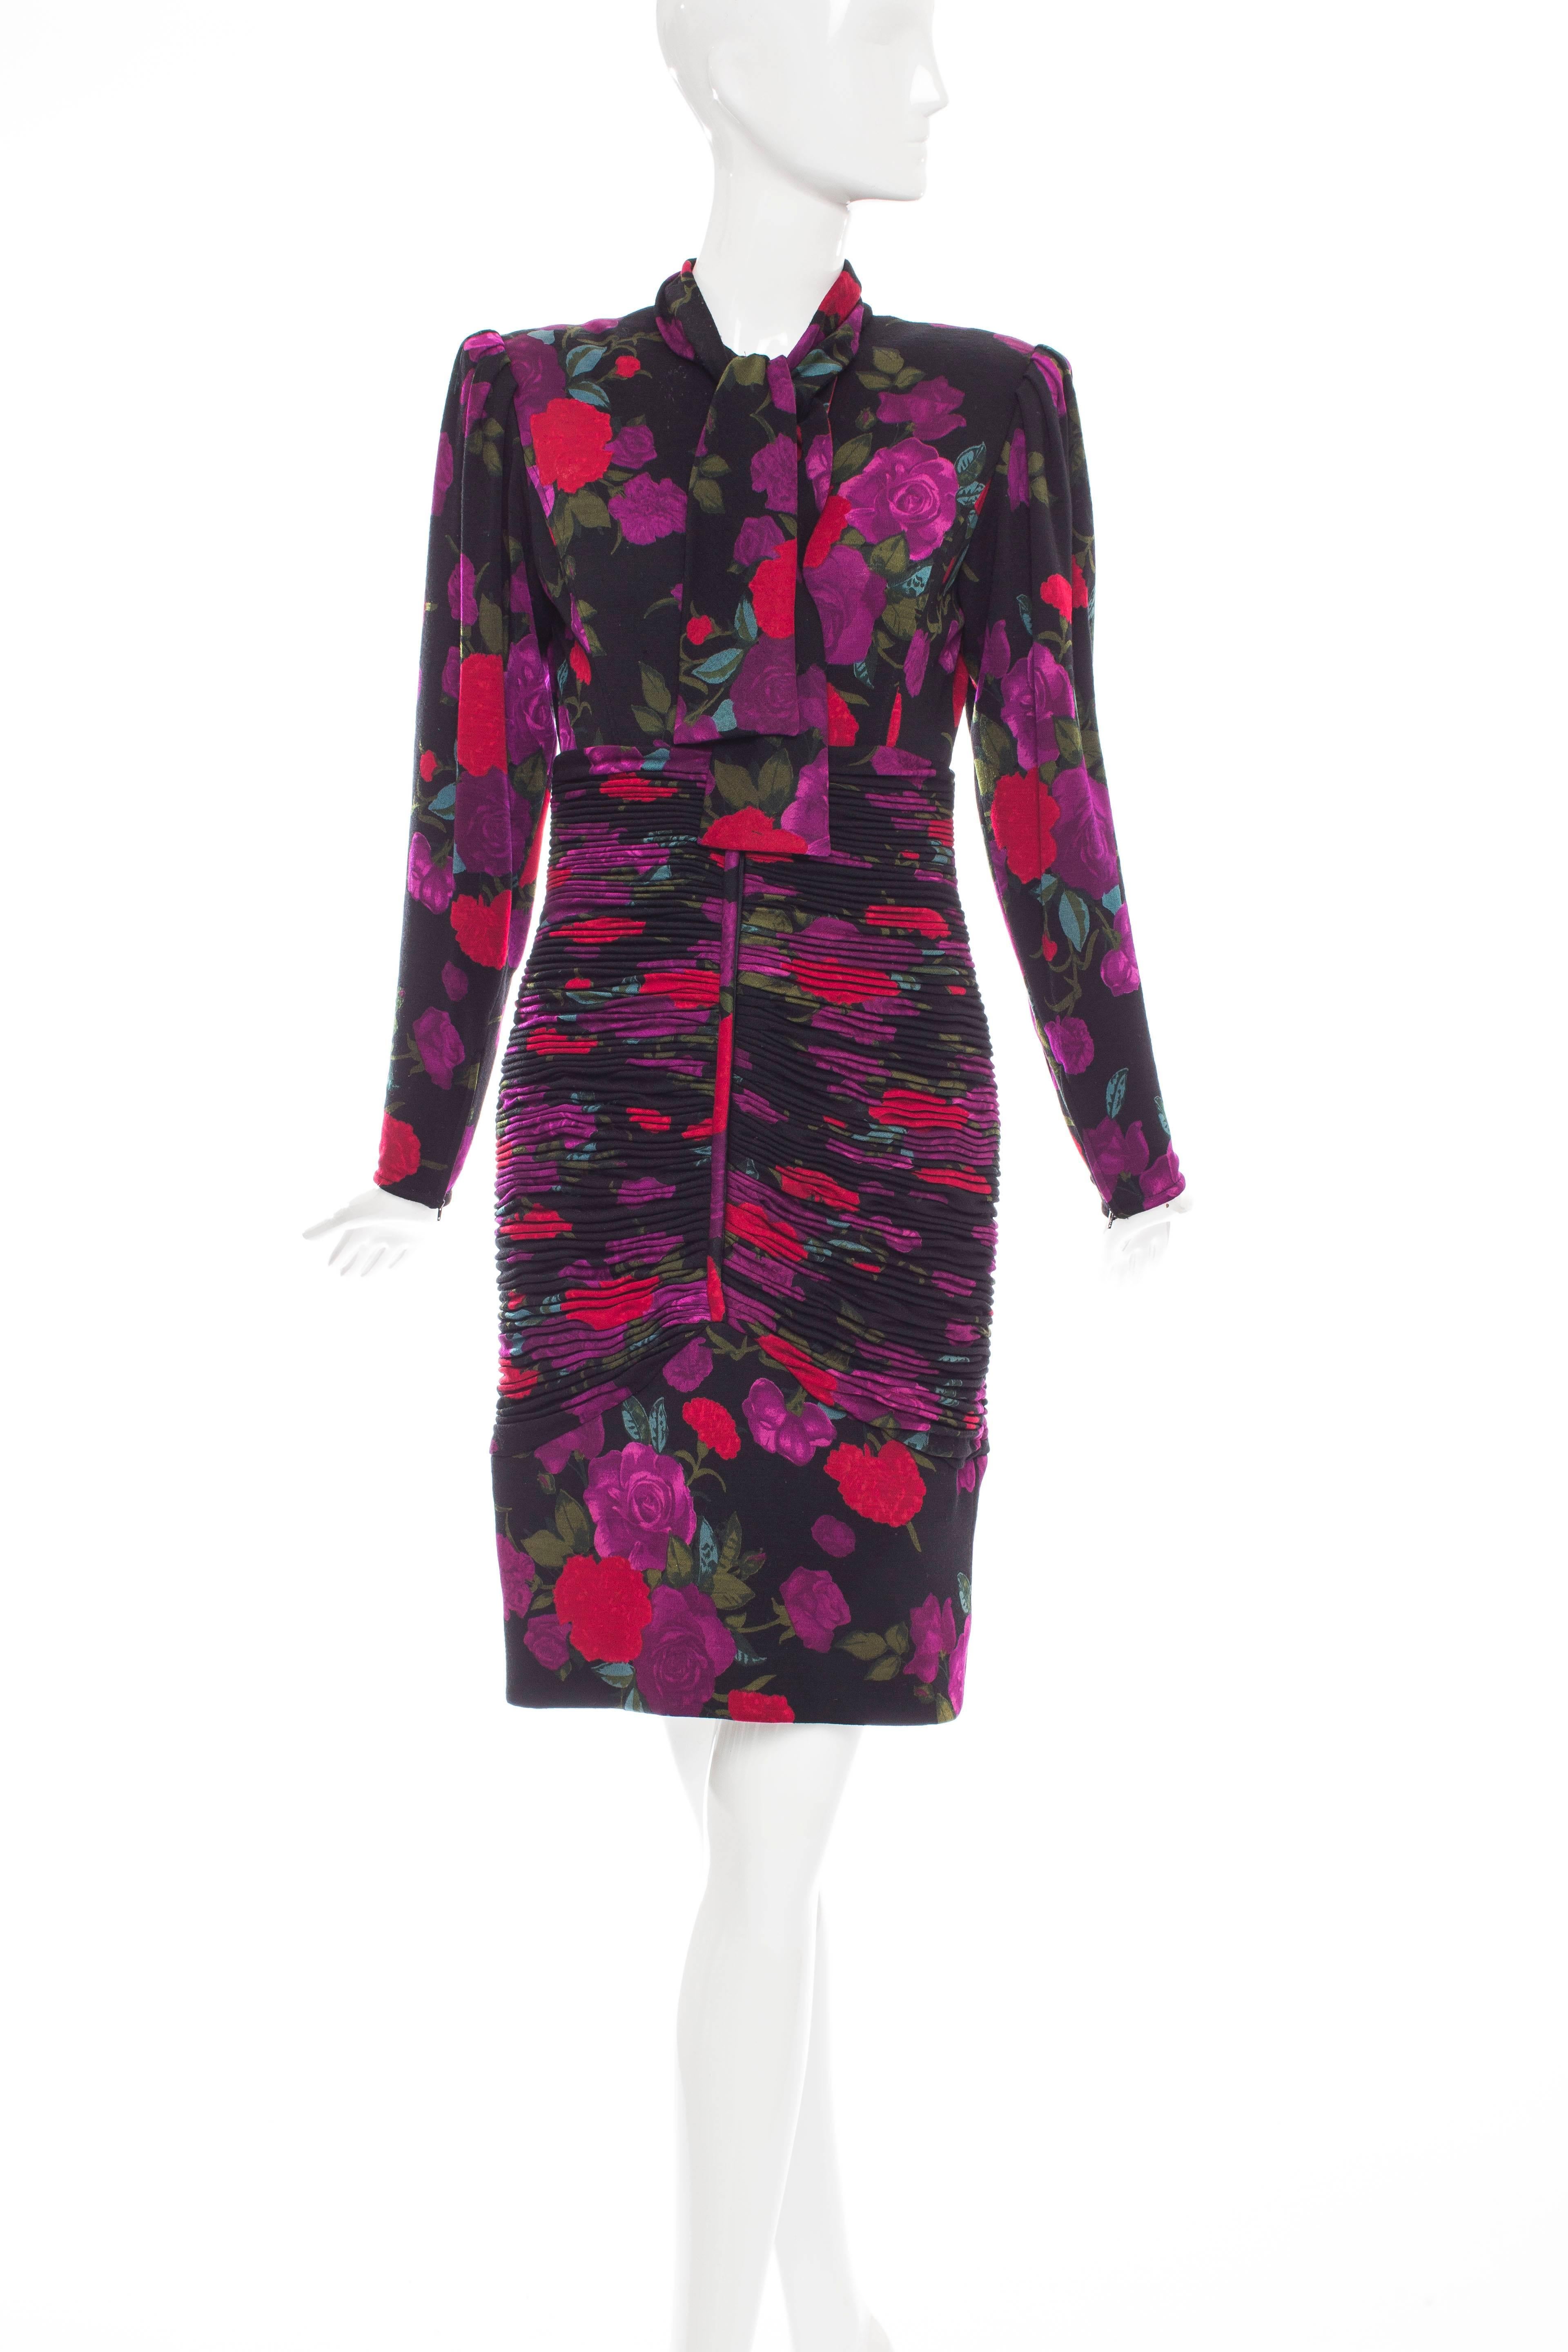 Emanuel Ungaro, circa 1980's floral wool jersey long sleeve dress,ruched midriff,black faceted glass buttons,zippered sleeves,shoulder pads and lined from waist on down.  

US. 4

Bust 33, Waist 26, Hip 32, Length 39